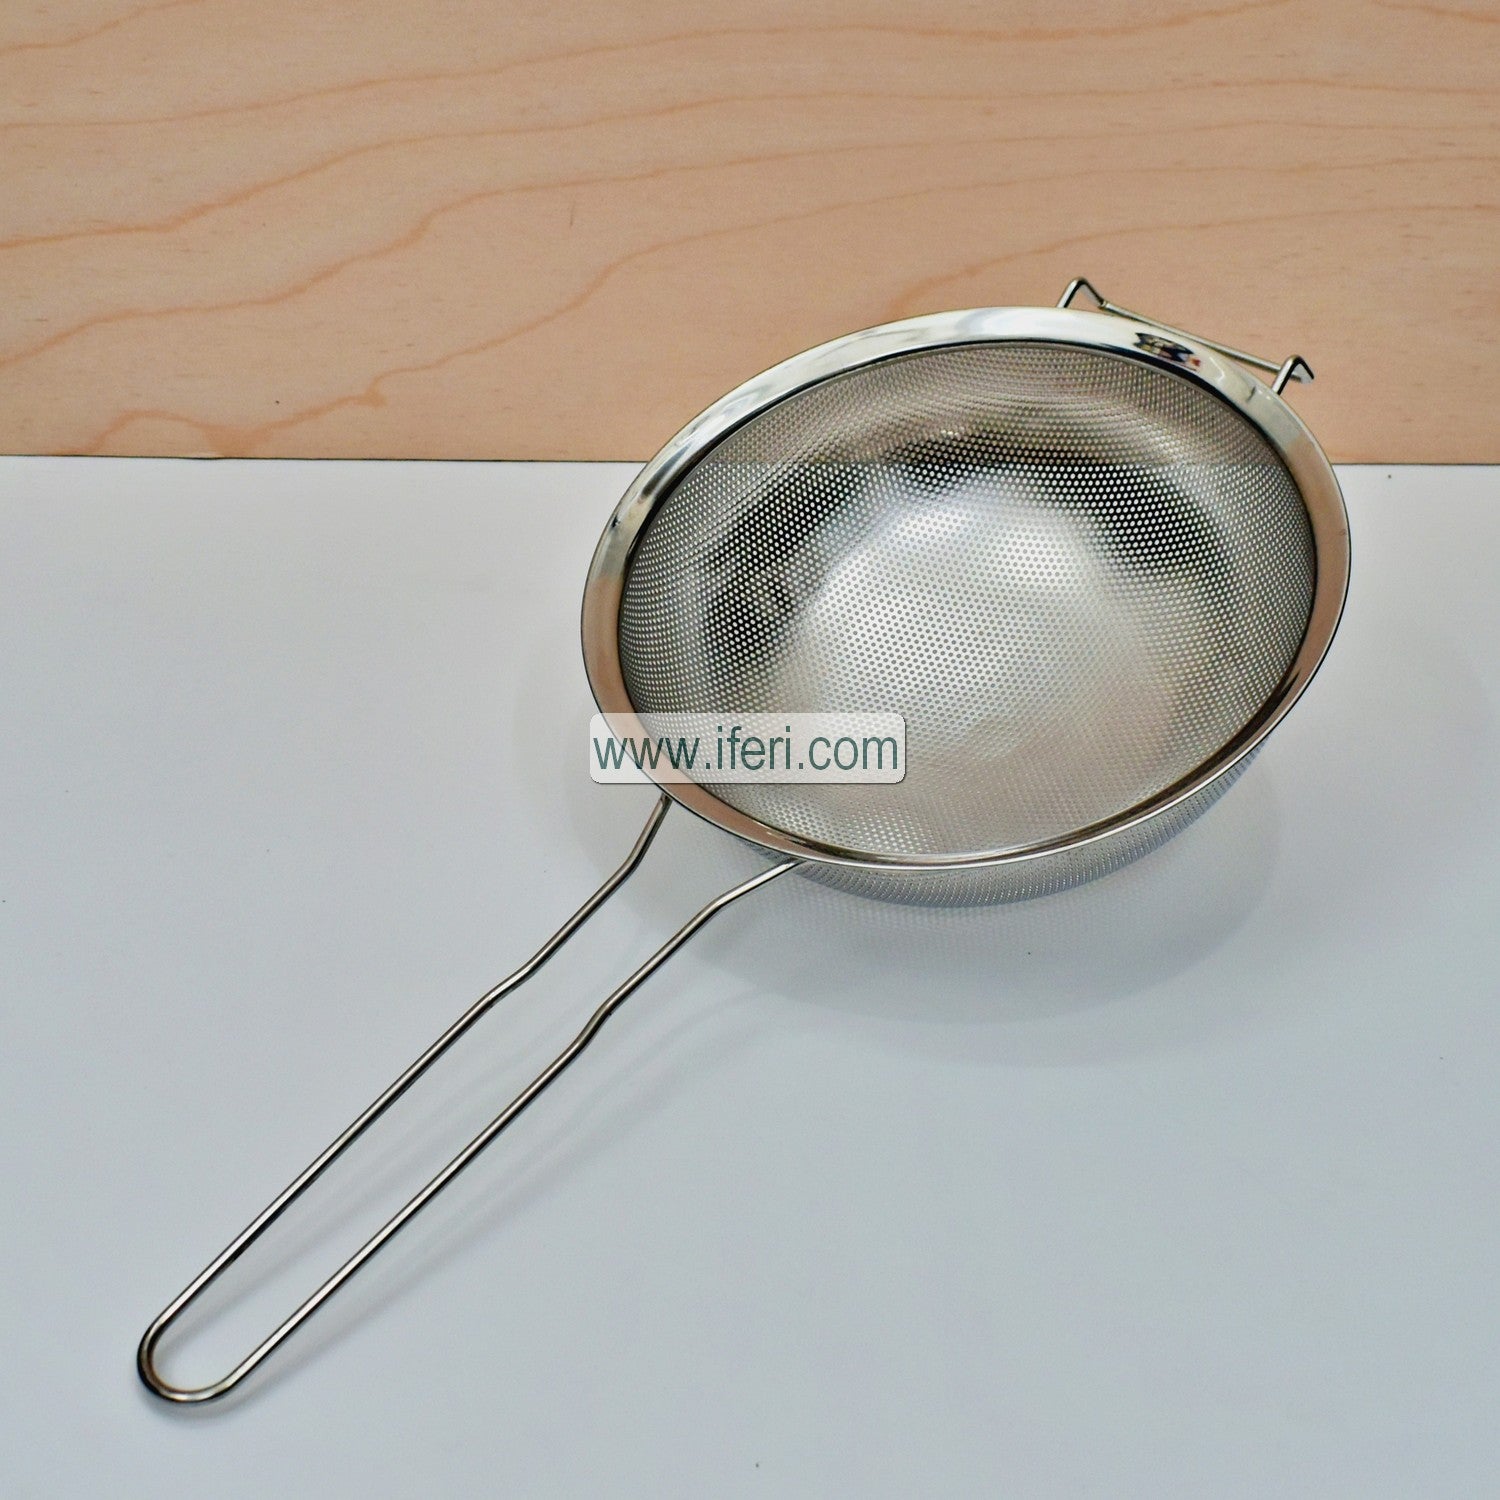 21 Inch Steel Strainer/Colander Sieve Sifters with Long Handle JNP15276